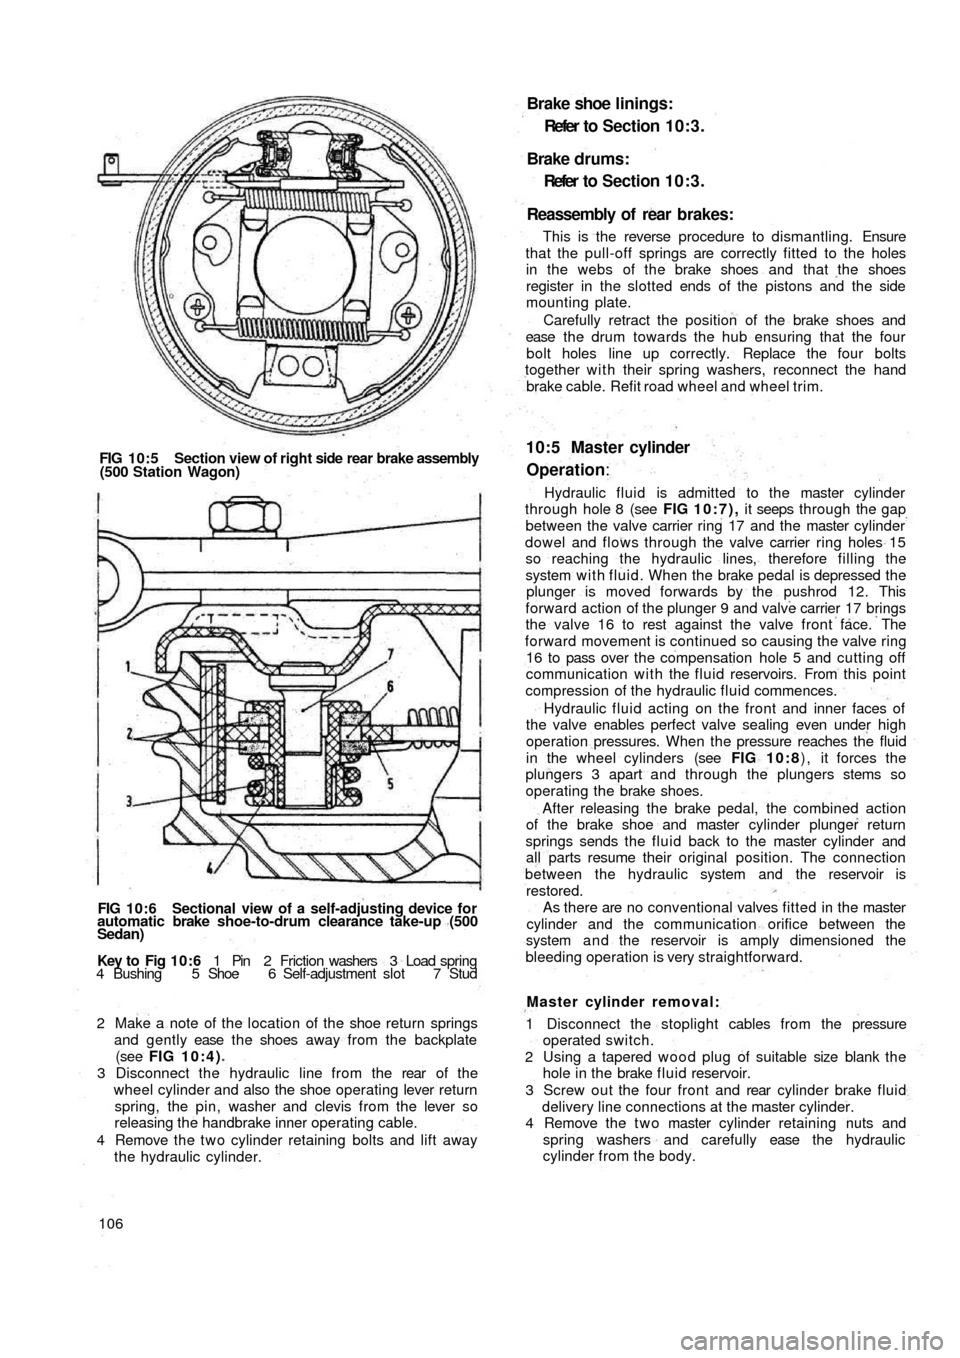 FIAT 500 1957 1.G Workshop Manual FIG 10:5 Section view of right side rear brake assembly
(500 Station Wagon)
FIG 10:6 Sectional view of a self-adjusting device for
automatic brake shoe-to-drum clearance take-up (500
Sedan)
Key  to   